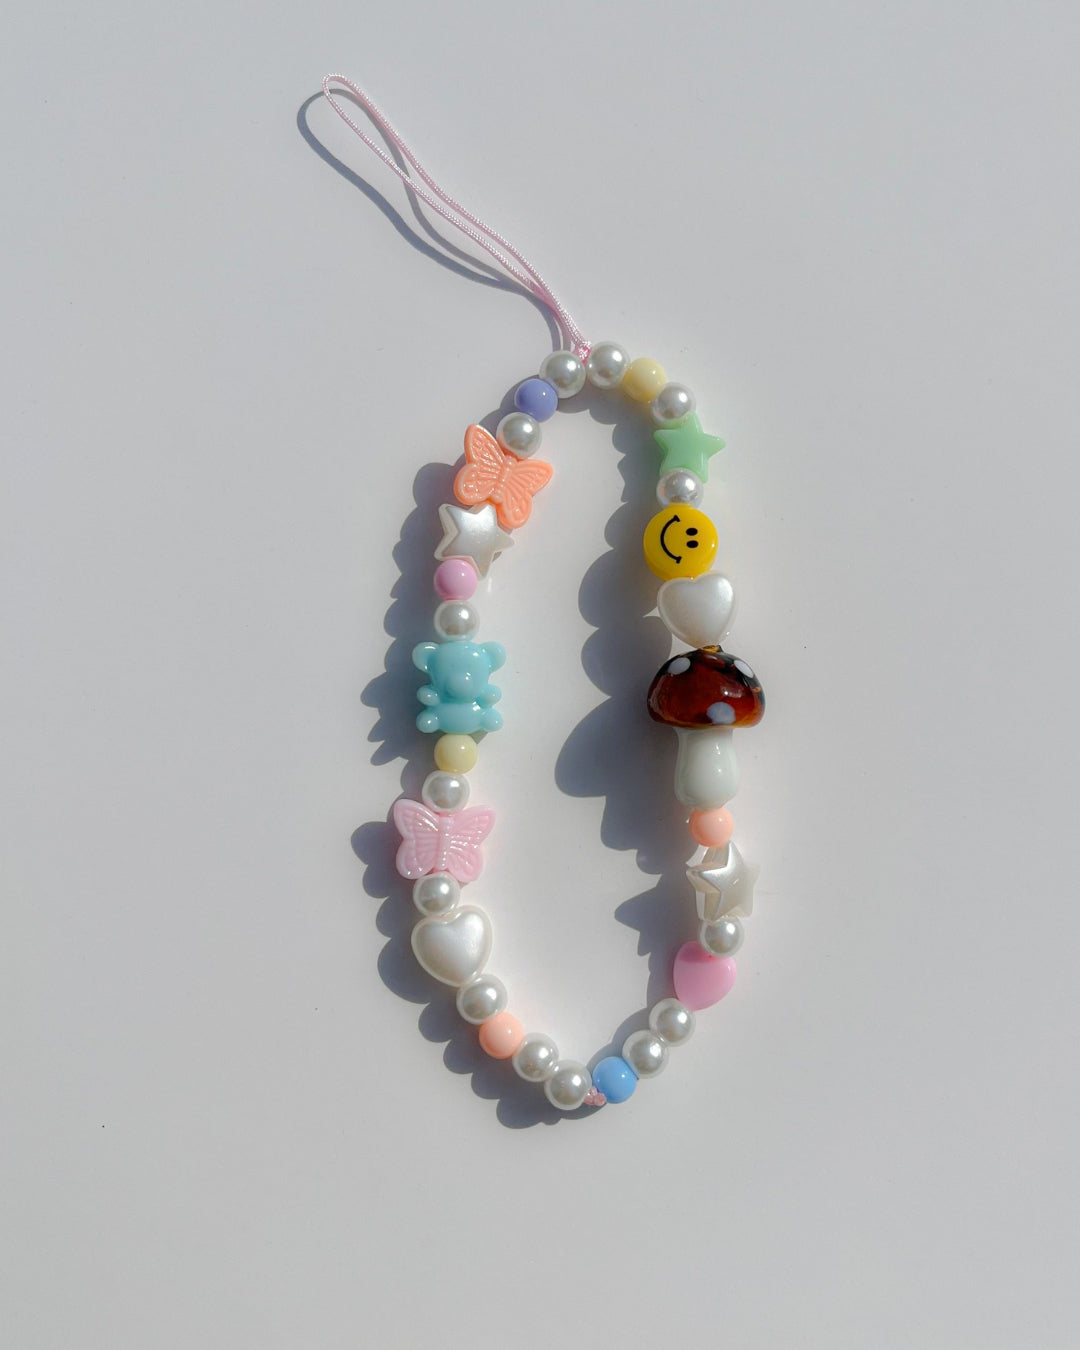 A studio shot of Buttercup Studio's Mushroom Forest Wonderland Phone Strap. Made with pearls, white star and heart beads, colourful beads, a blue bear bead, pink and orange butterfly beads, a smiley face bead and a special brown mushroom lampwork glass bead. 